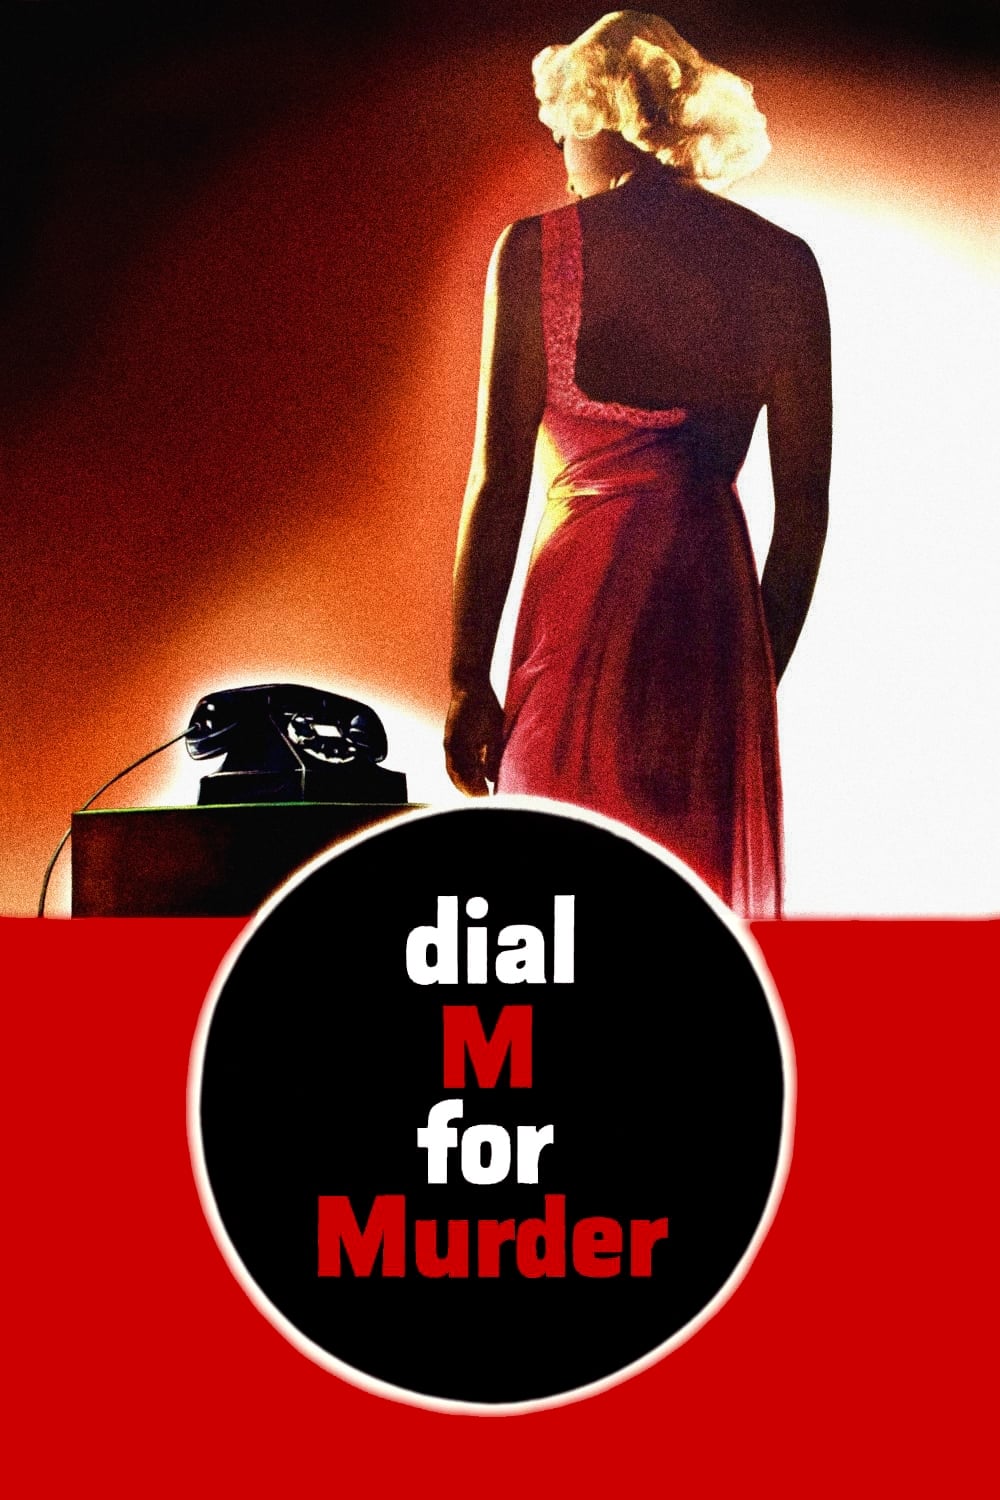 Image Dial M for Murder